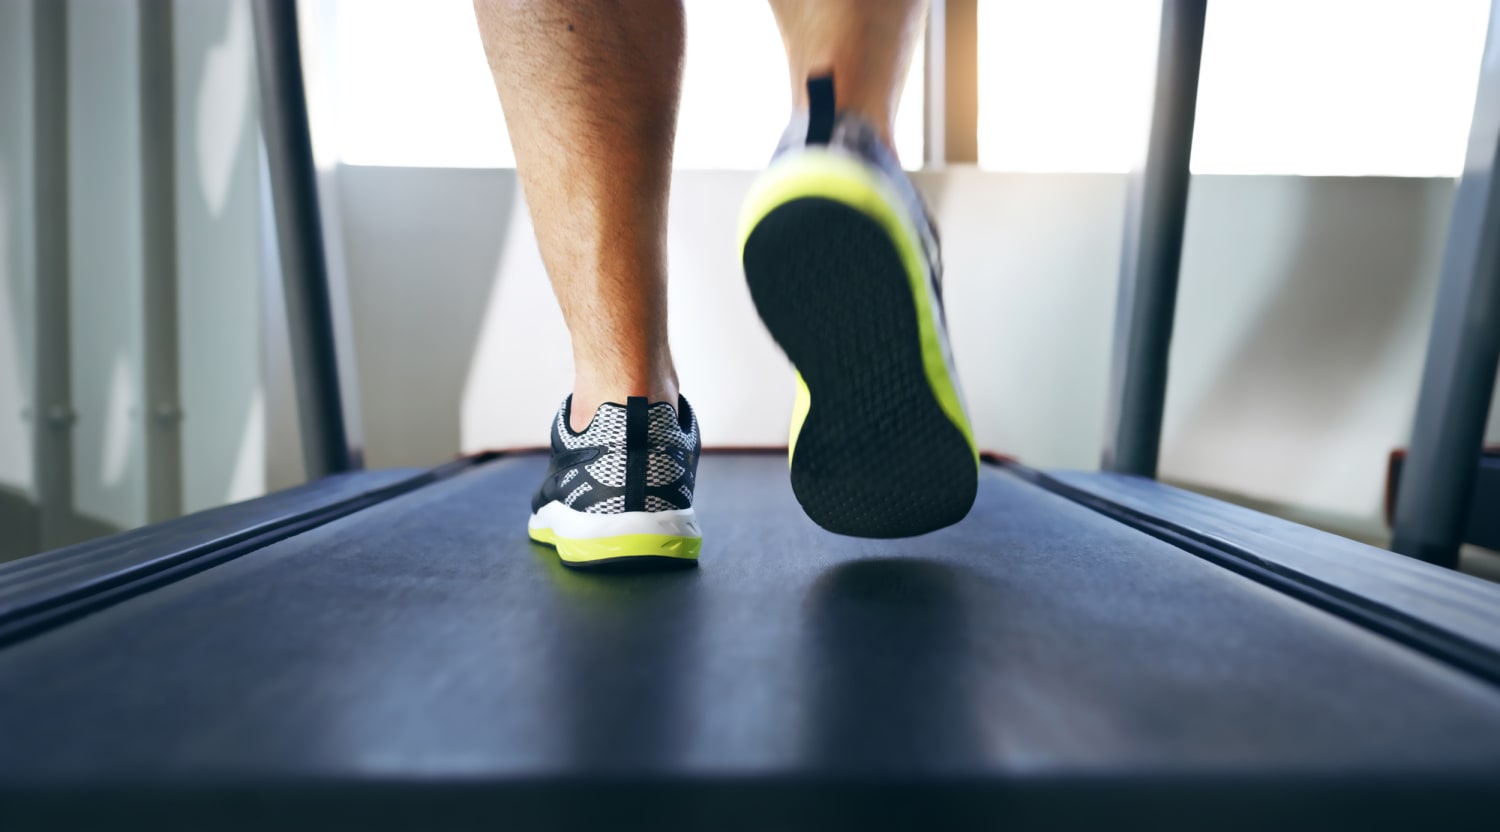 A one-month treadmill workout to get 